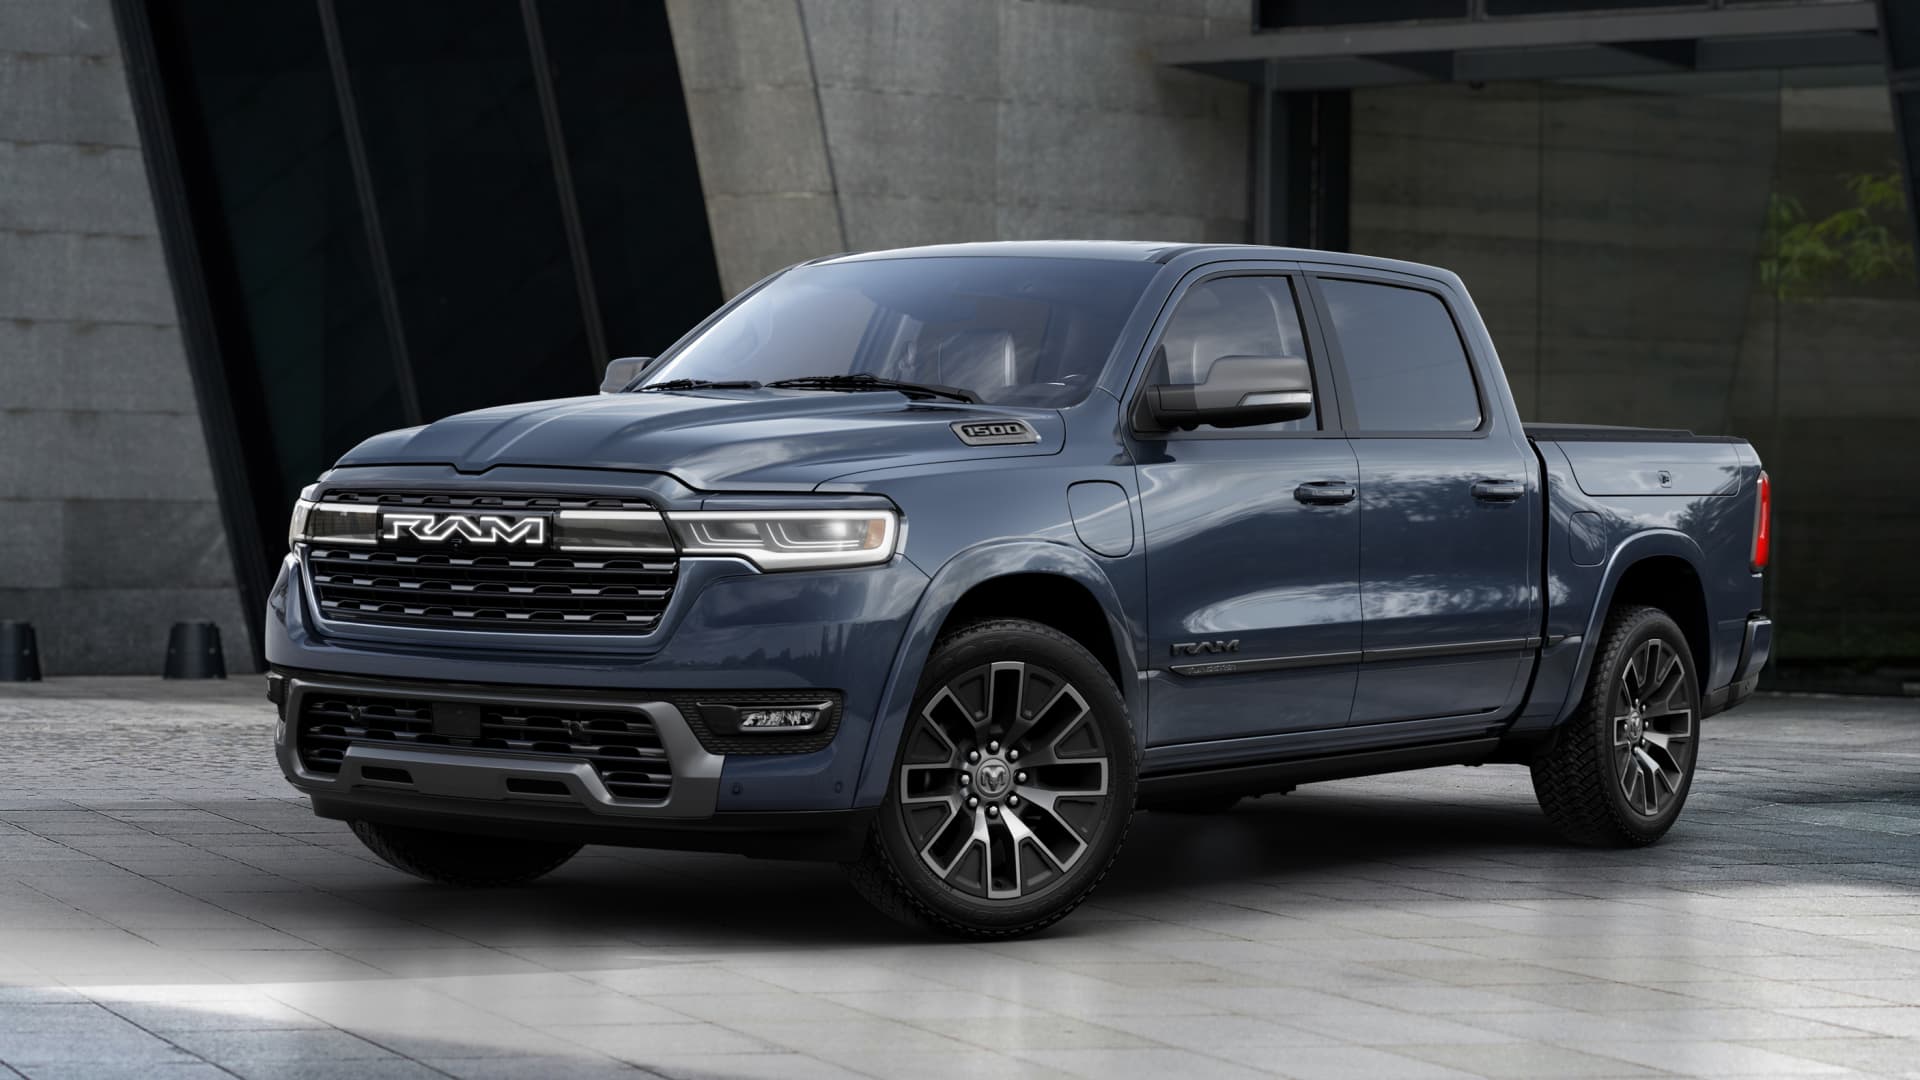 Stellantis' new Ram pickup is an EV — with a gas-powered generator in case the battery runs out